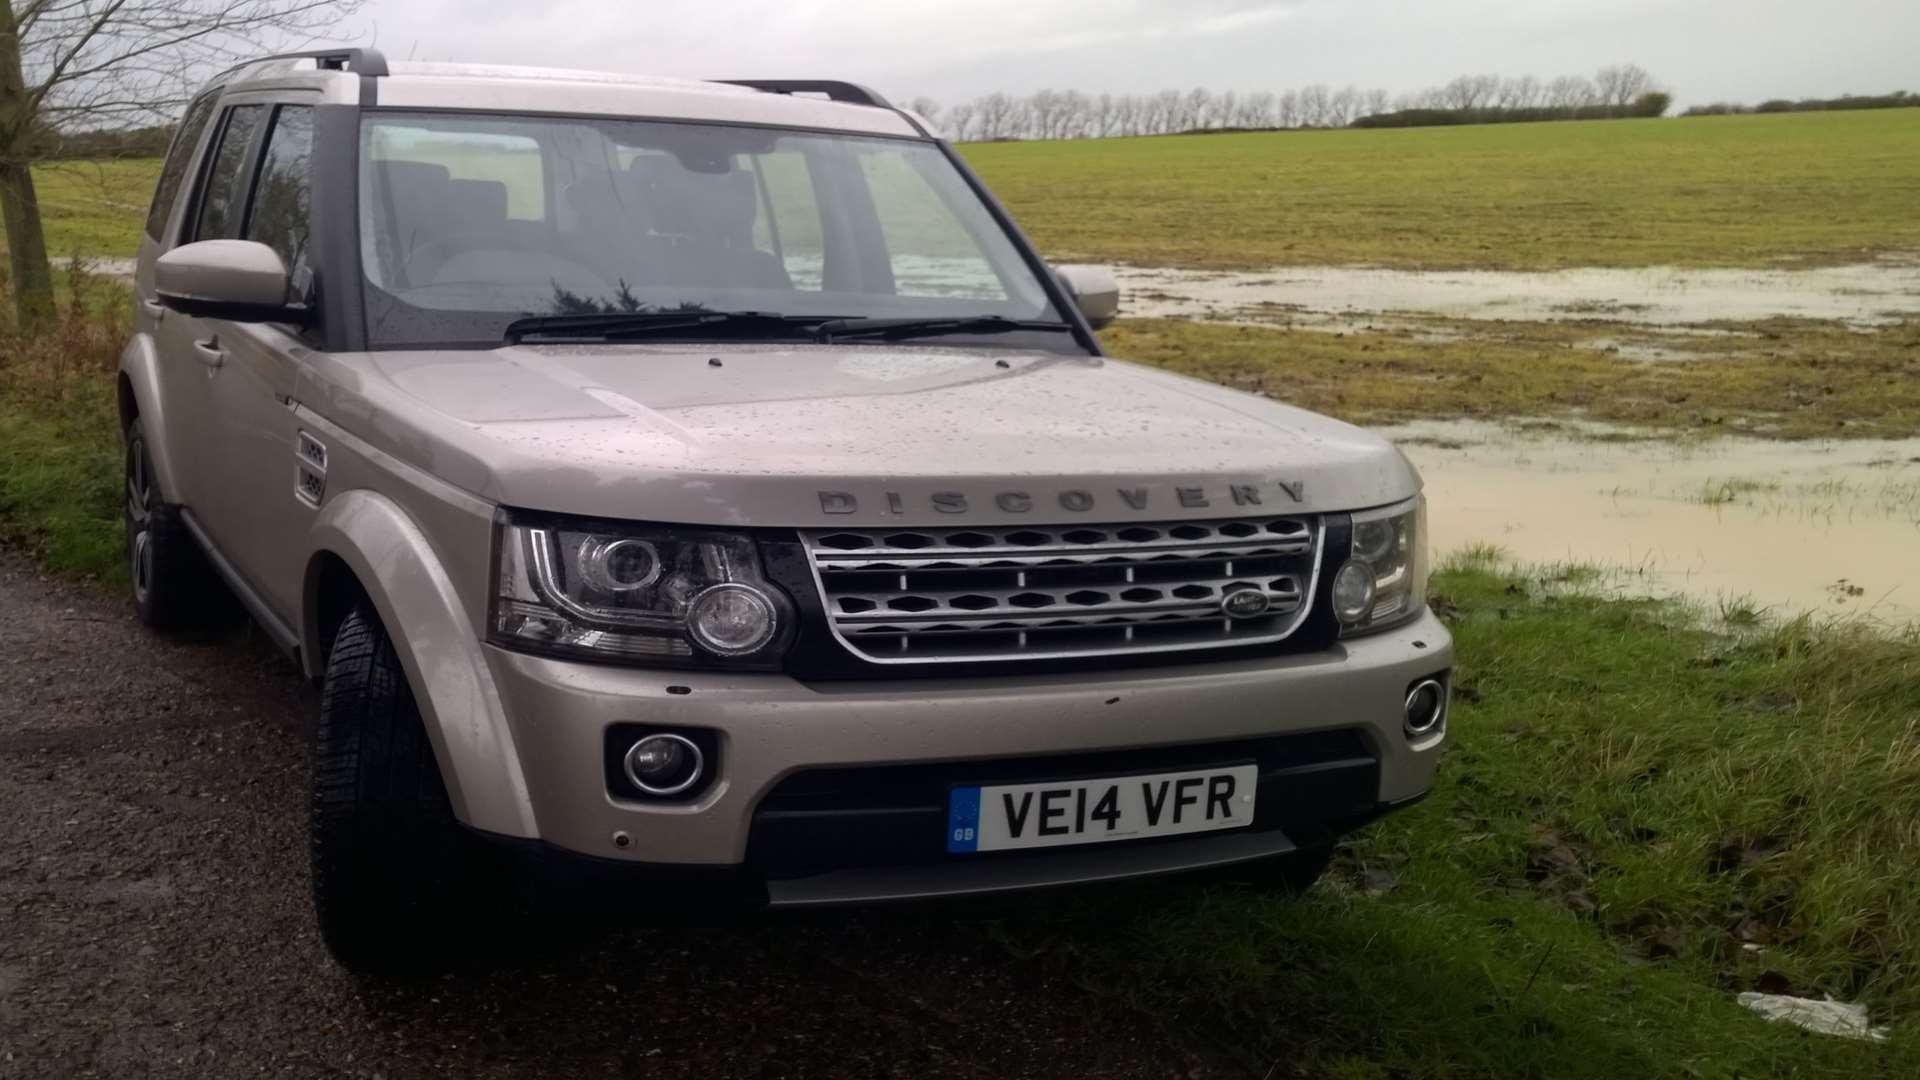 Off-road or on it, the Discovery 4 excels